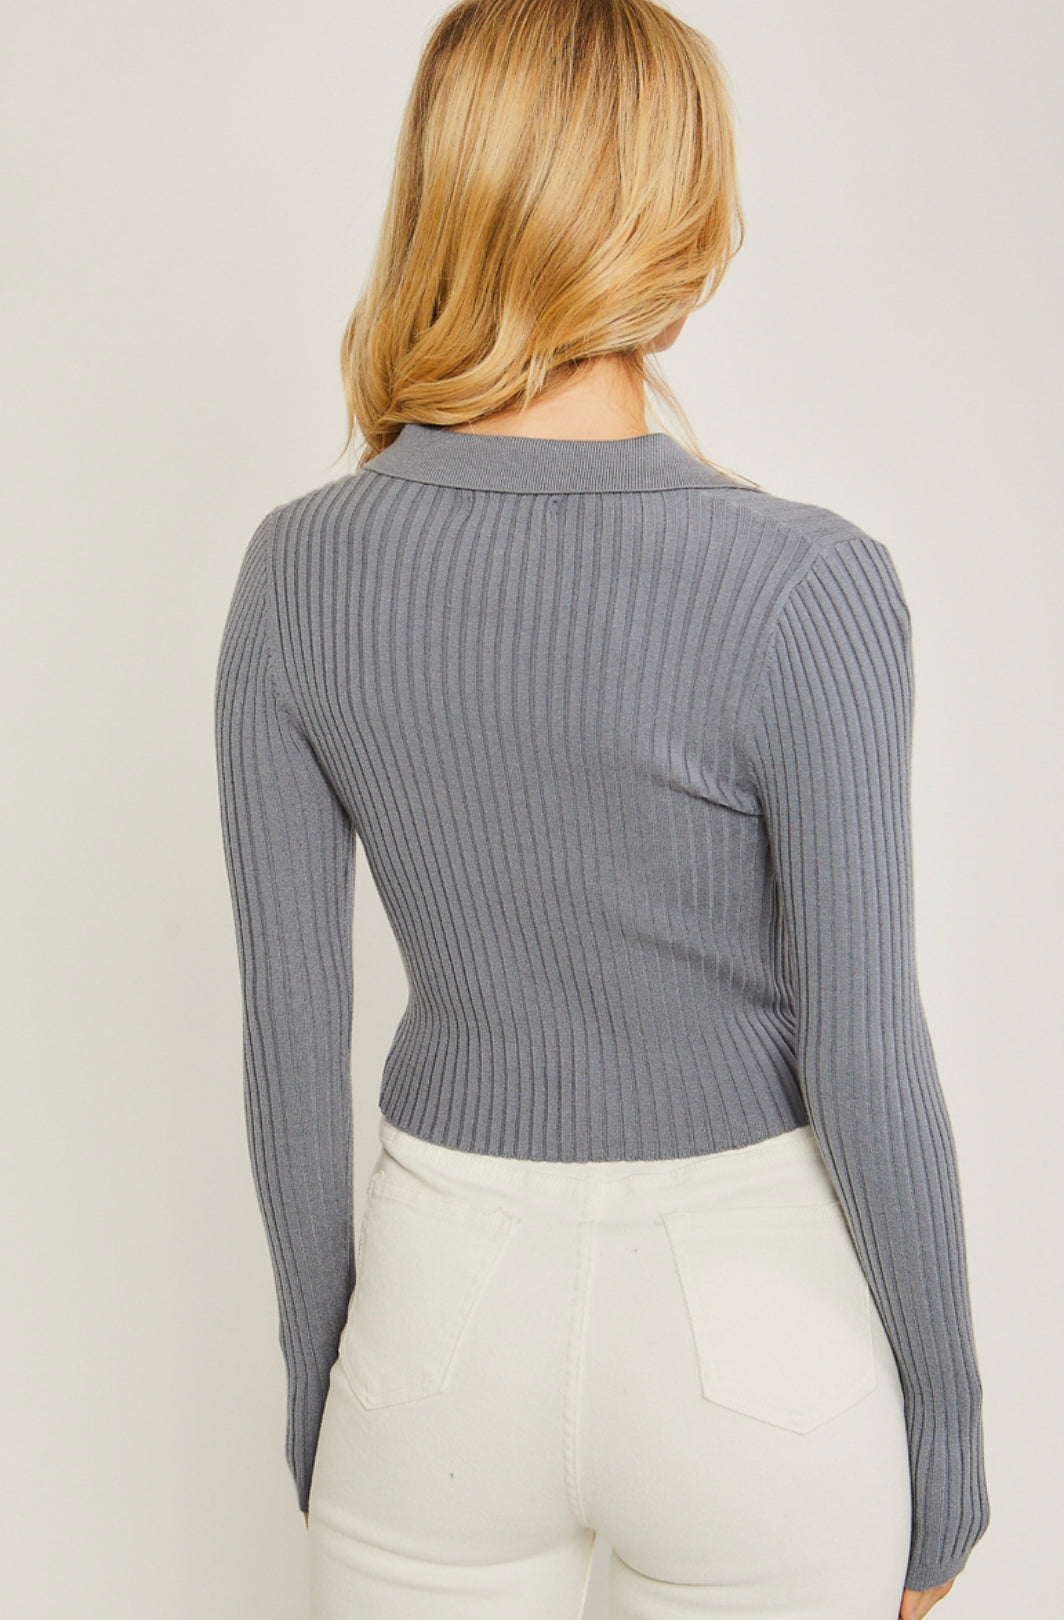 Ribbed collared sweater top